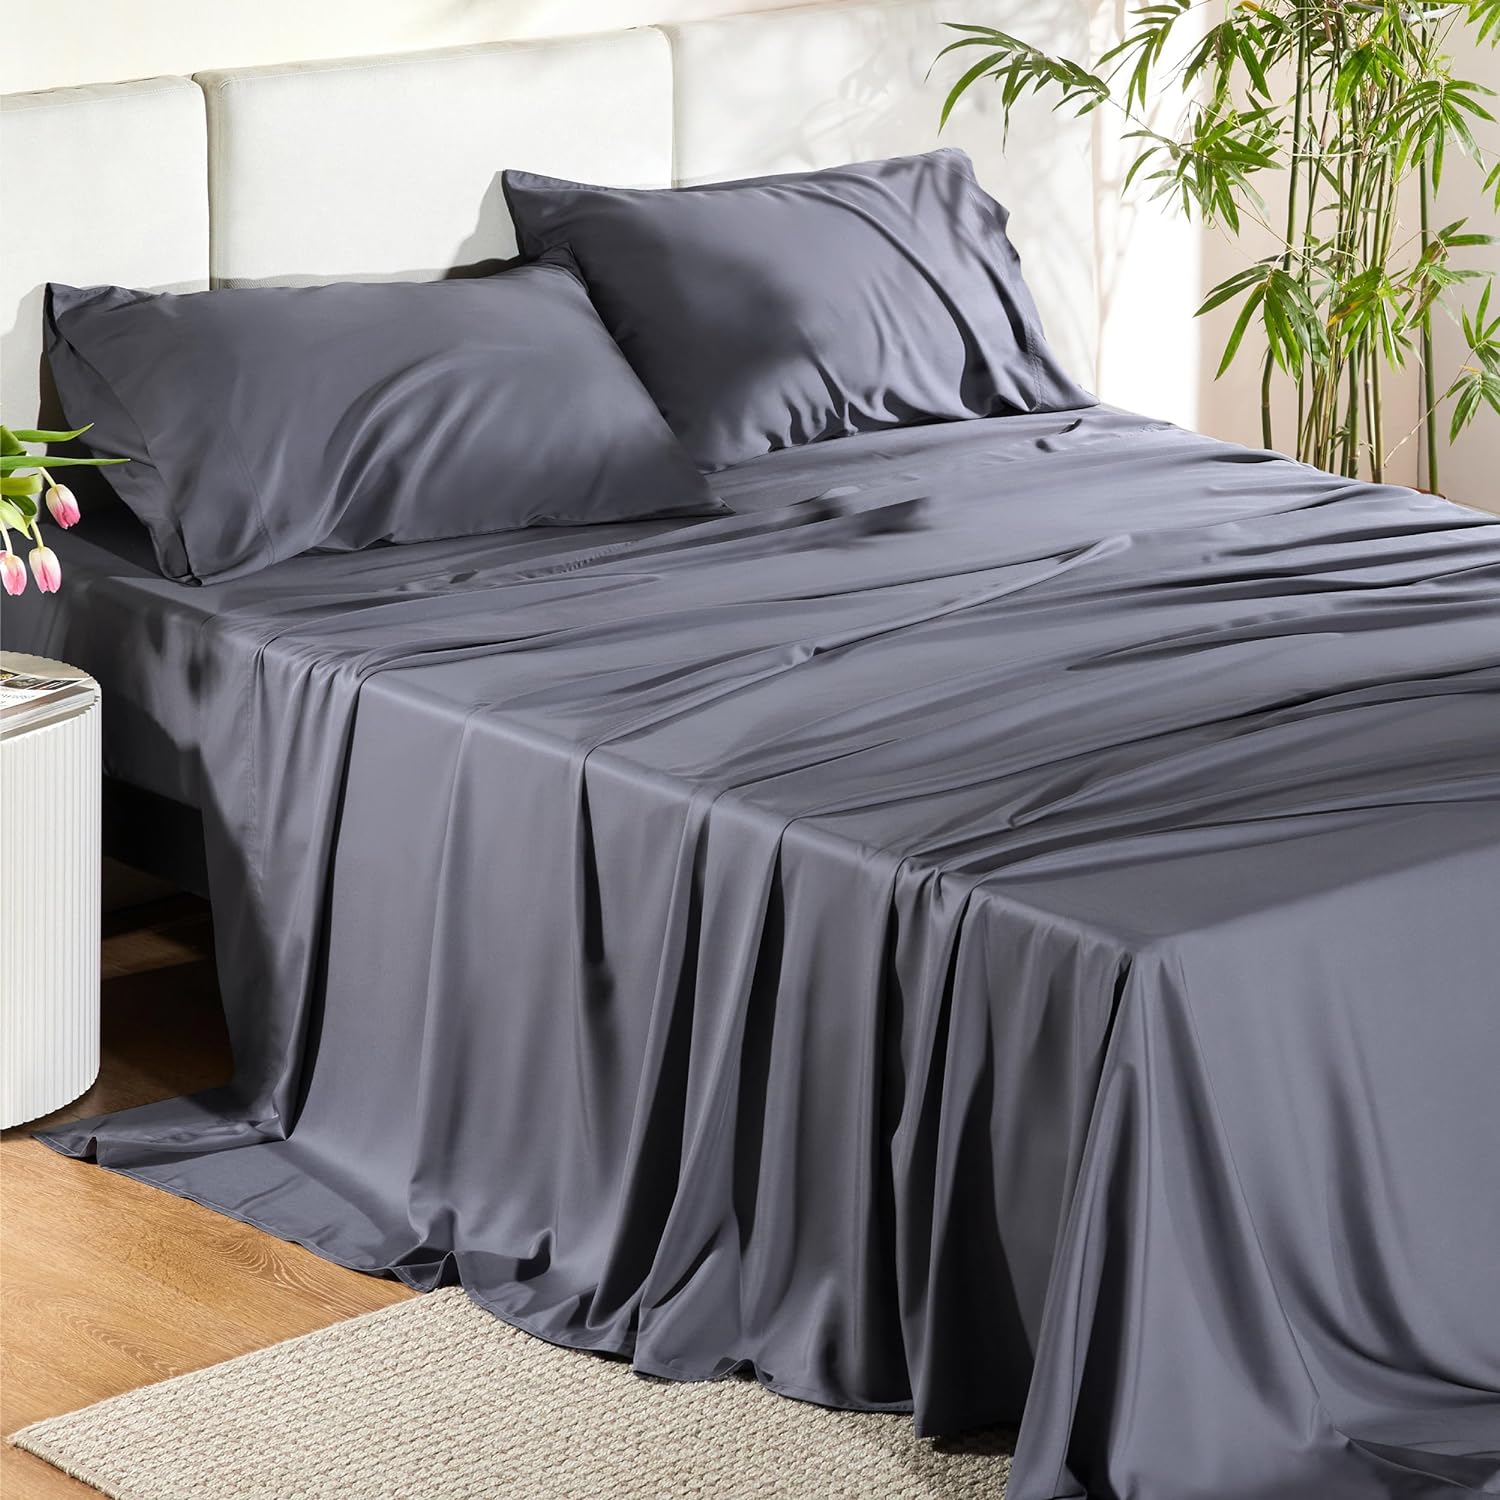 Bedsure King Size Sheet Set, Cooling Sheets King, Rayon Derived from Bamboo, Deep Pocket Up to 16, Breathable & Soft Bed Sheets, Hotel Luxury Silky Bedding Sheets & Pillowcases, Dark Grey